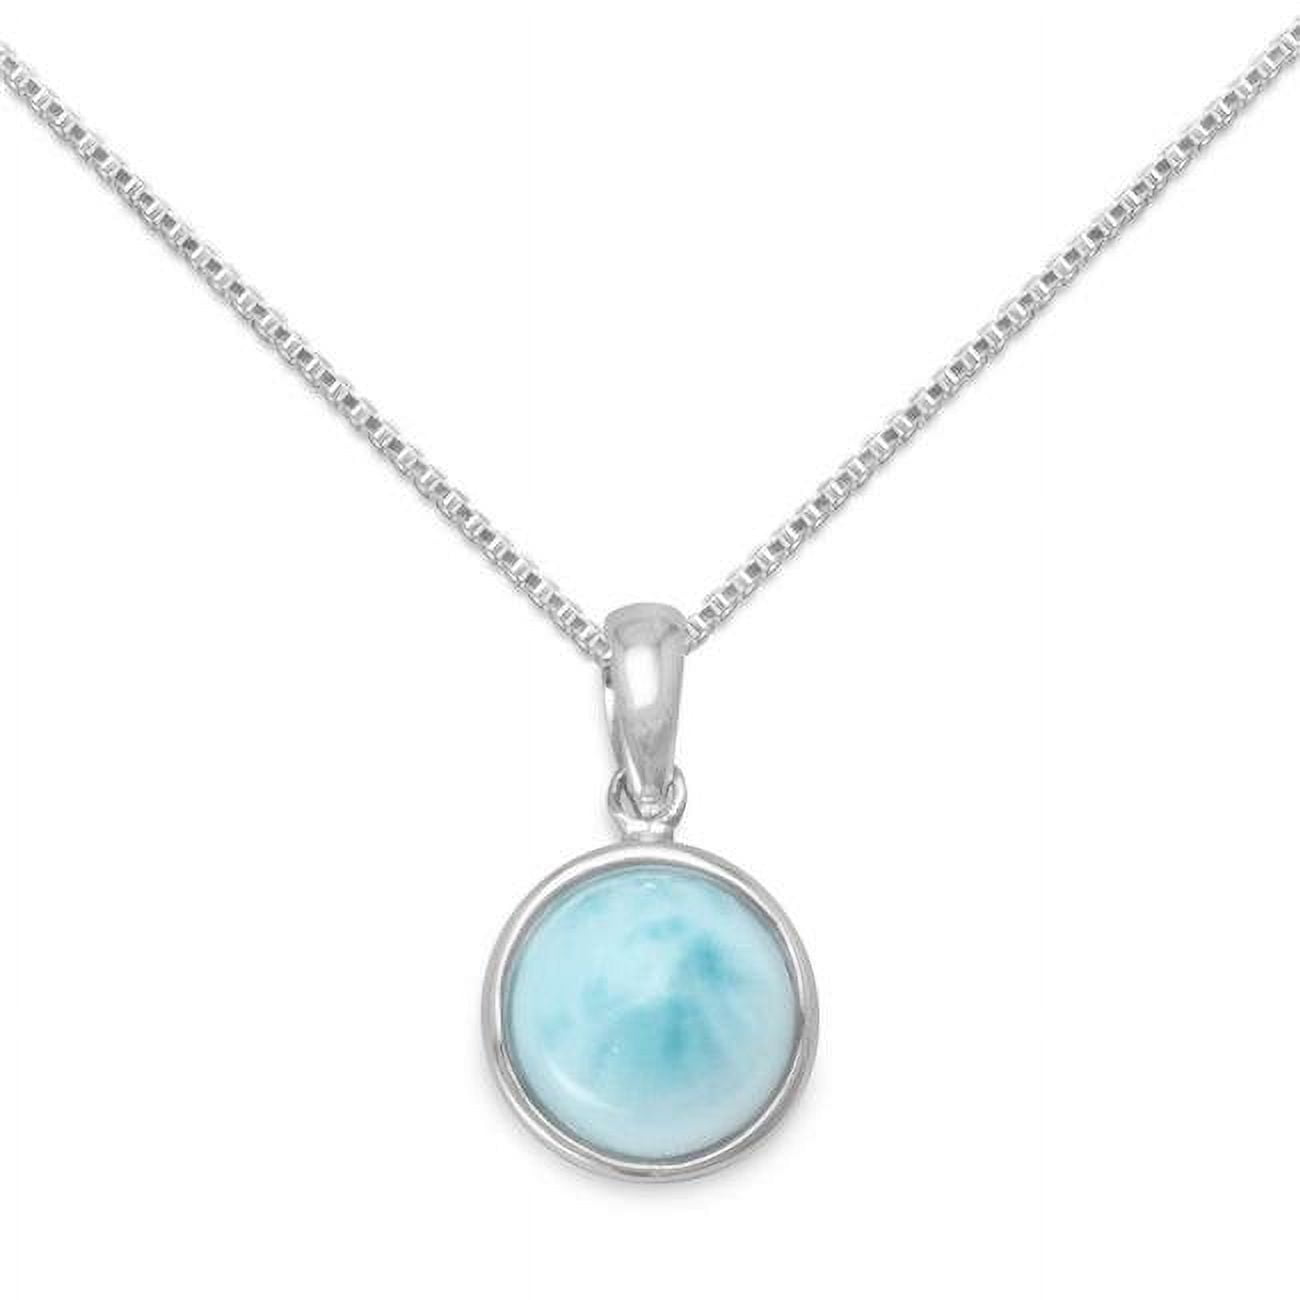 74276-24 24 In. Sterling Silver Round-shape Blue Larimar Pendant With 1.5 Mm Box Chain